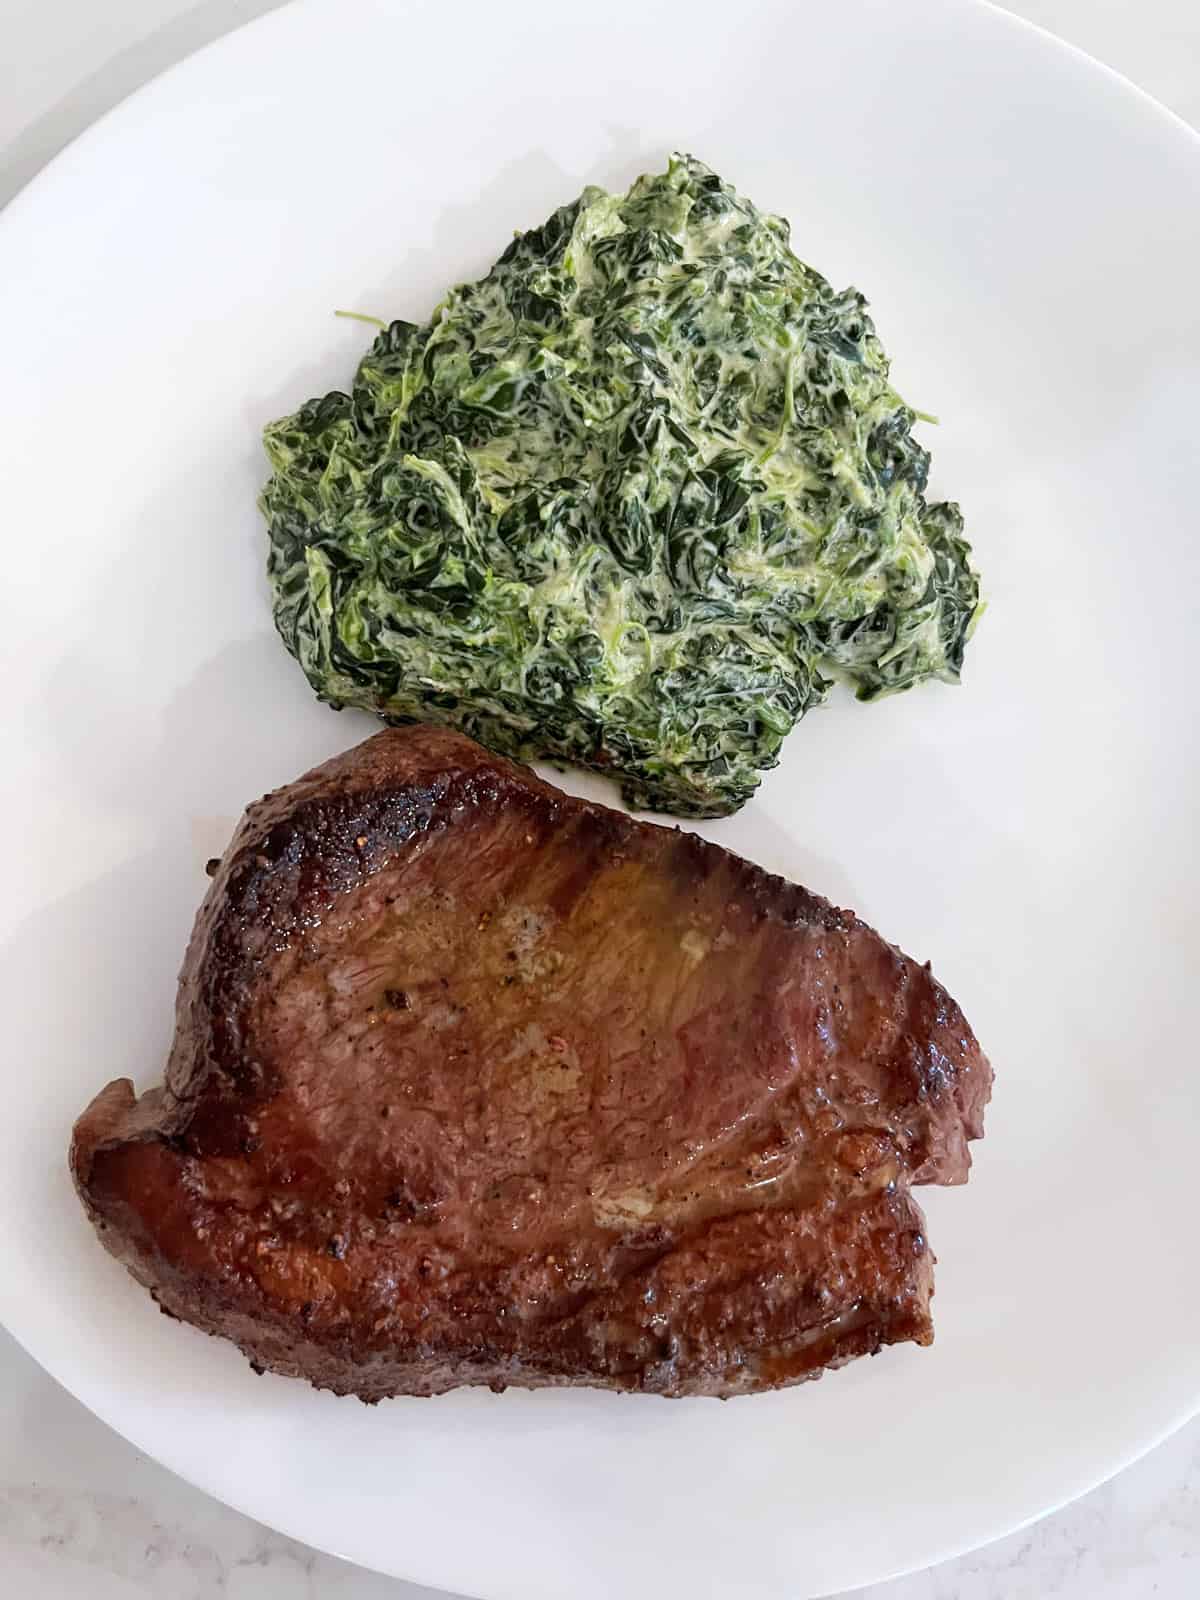 Leftover picanha steak, reheated and served with creamed spinach.